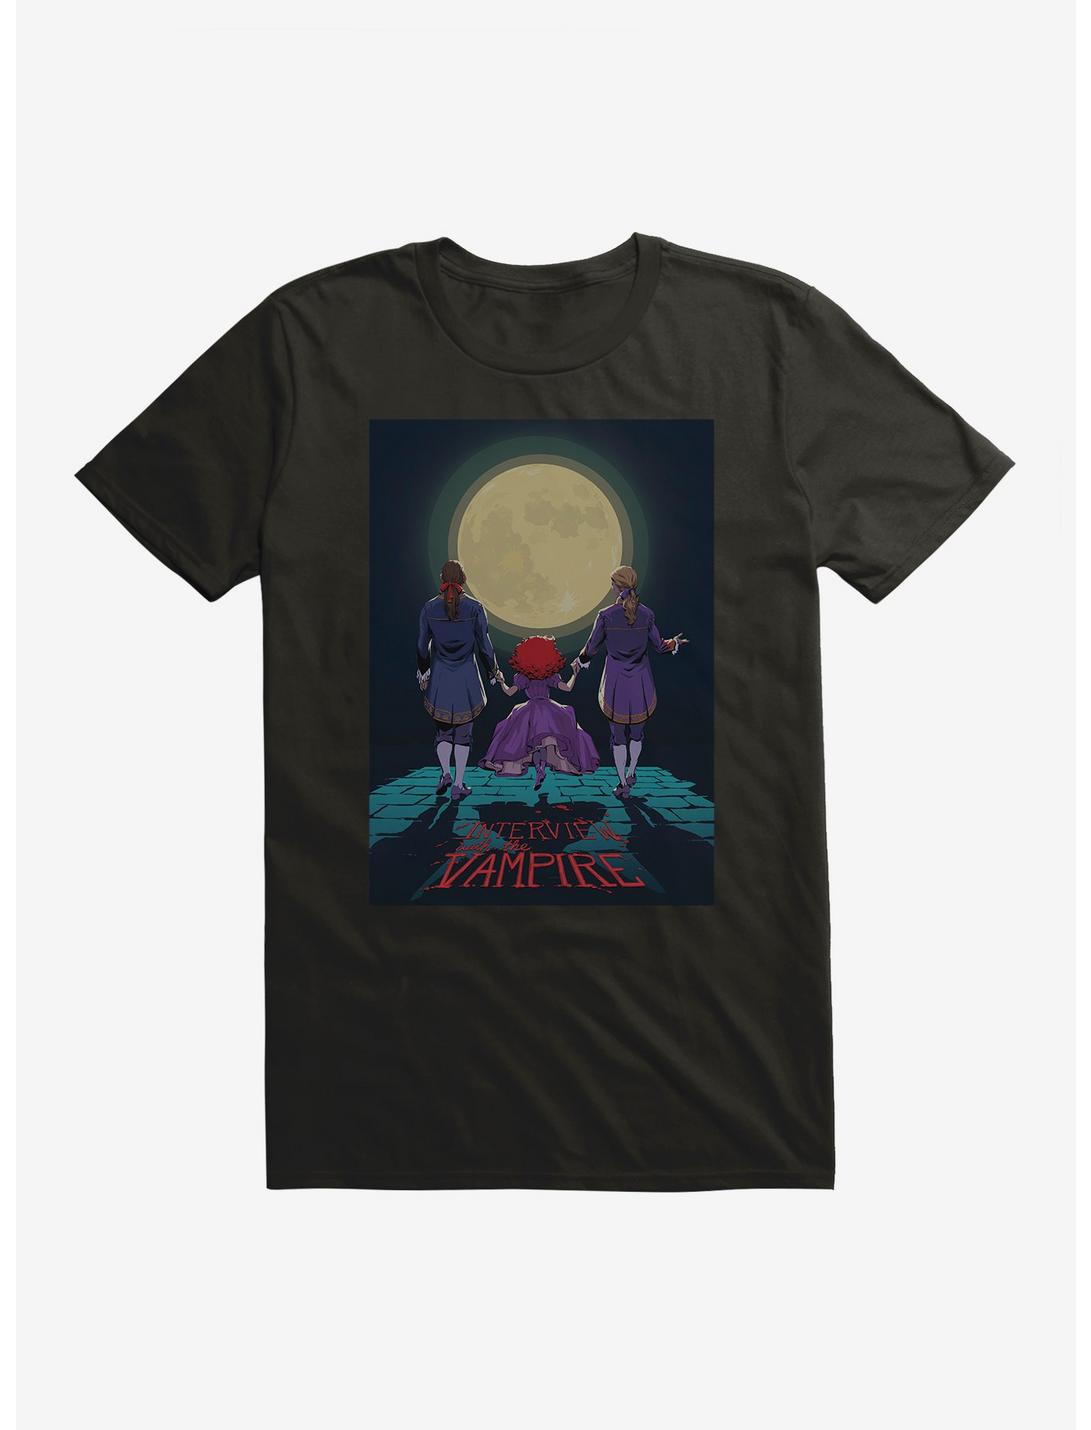 Interview With The Vampire WB 100 Full Moon T-Shirt, , hi-res